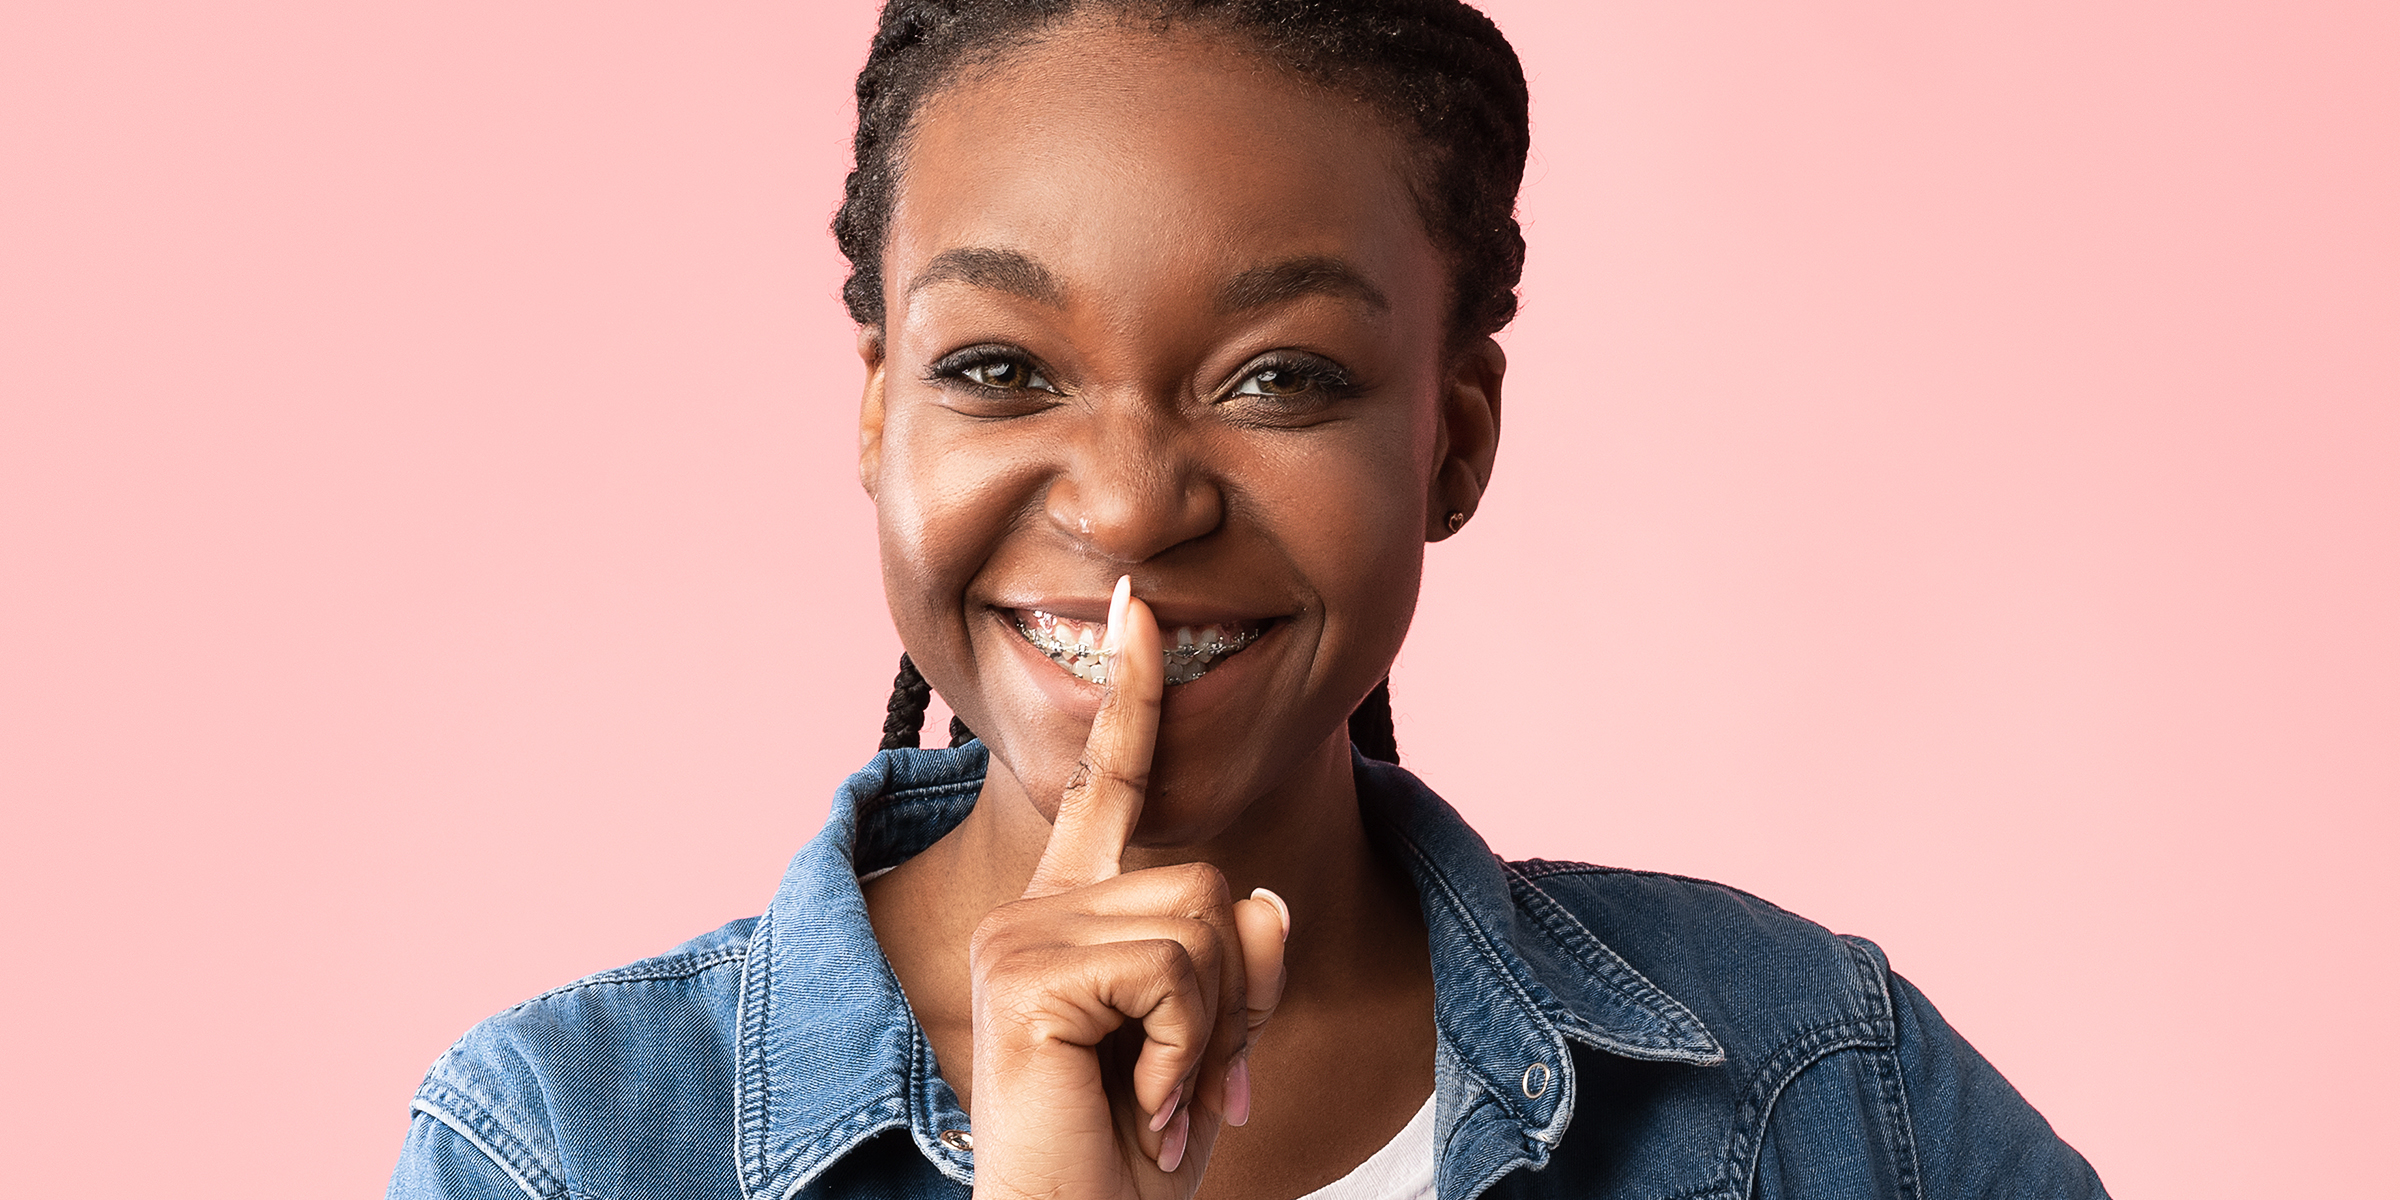 A woman holding her finger to her mouth | Source: Shutterstock